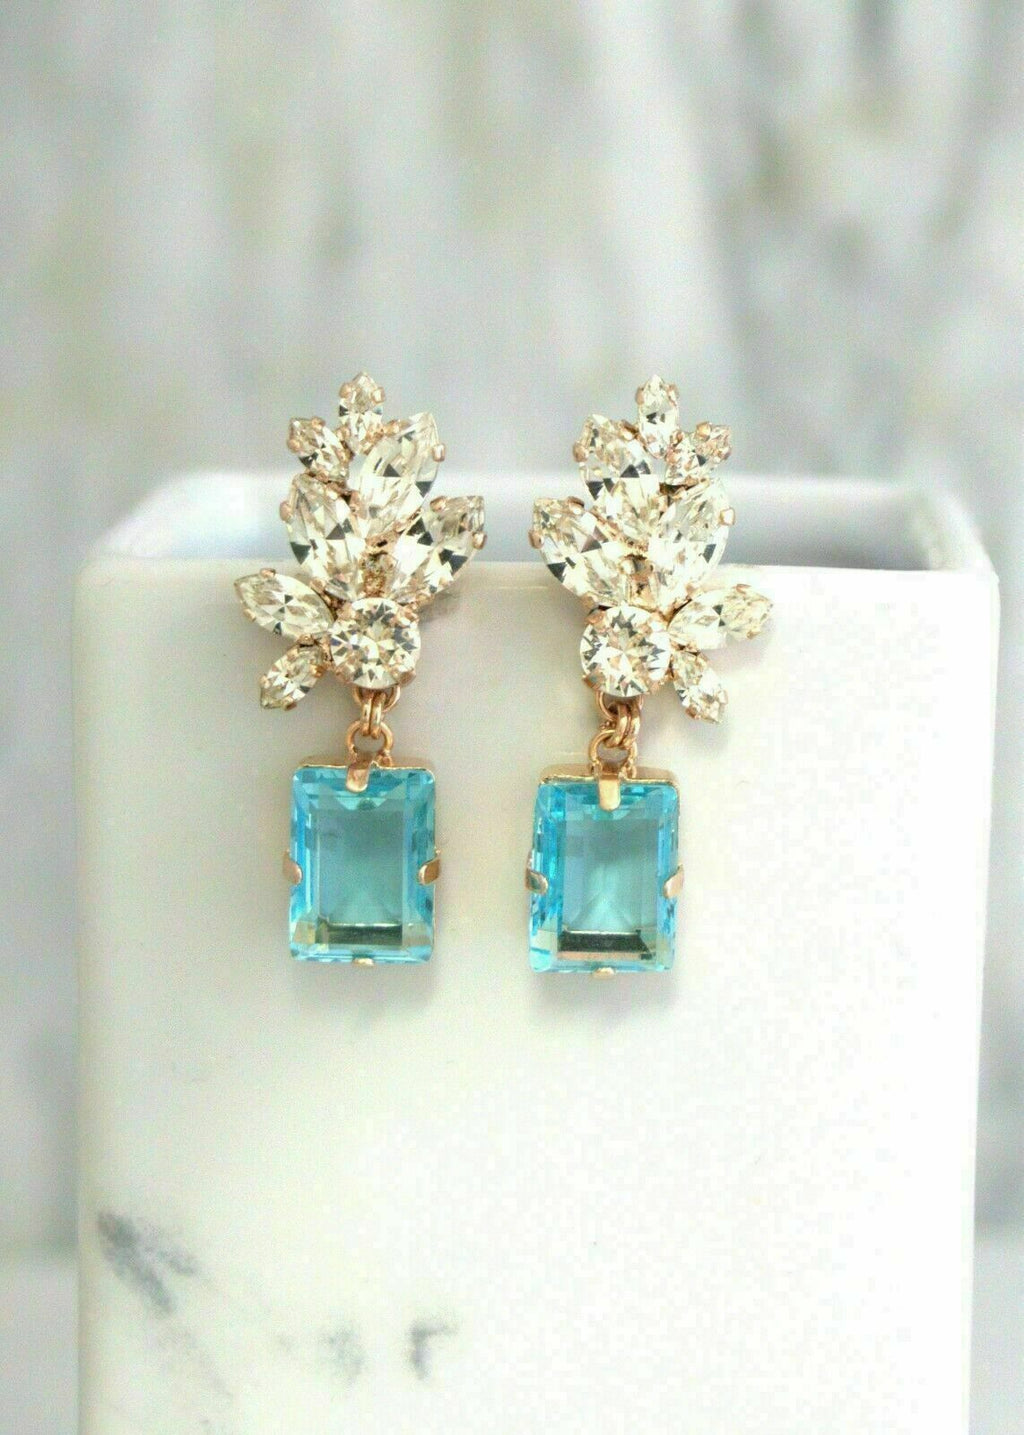 3 CT Emerald Cut Blue Topaz Drop/Dangle Earrings Jewelry Gift Her 925 Sterling Sliver